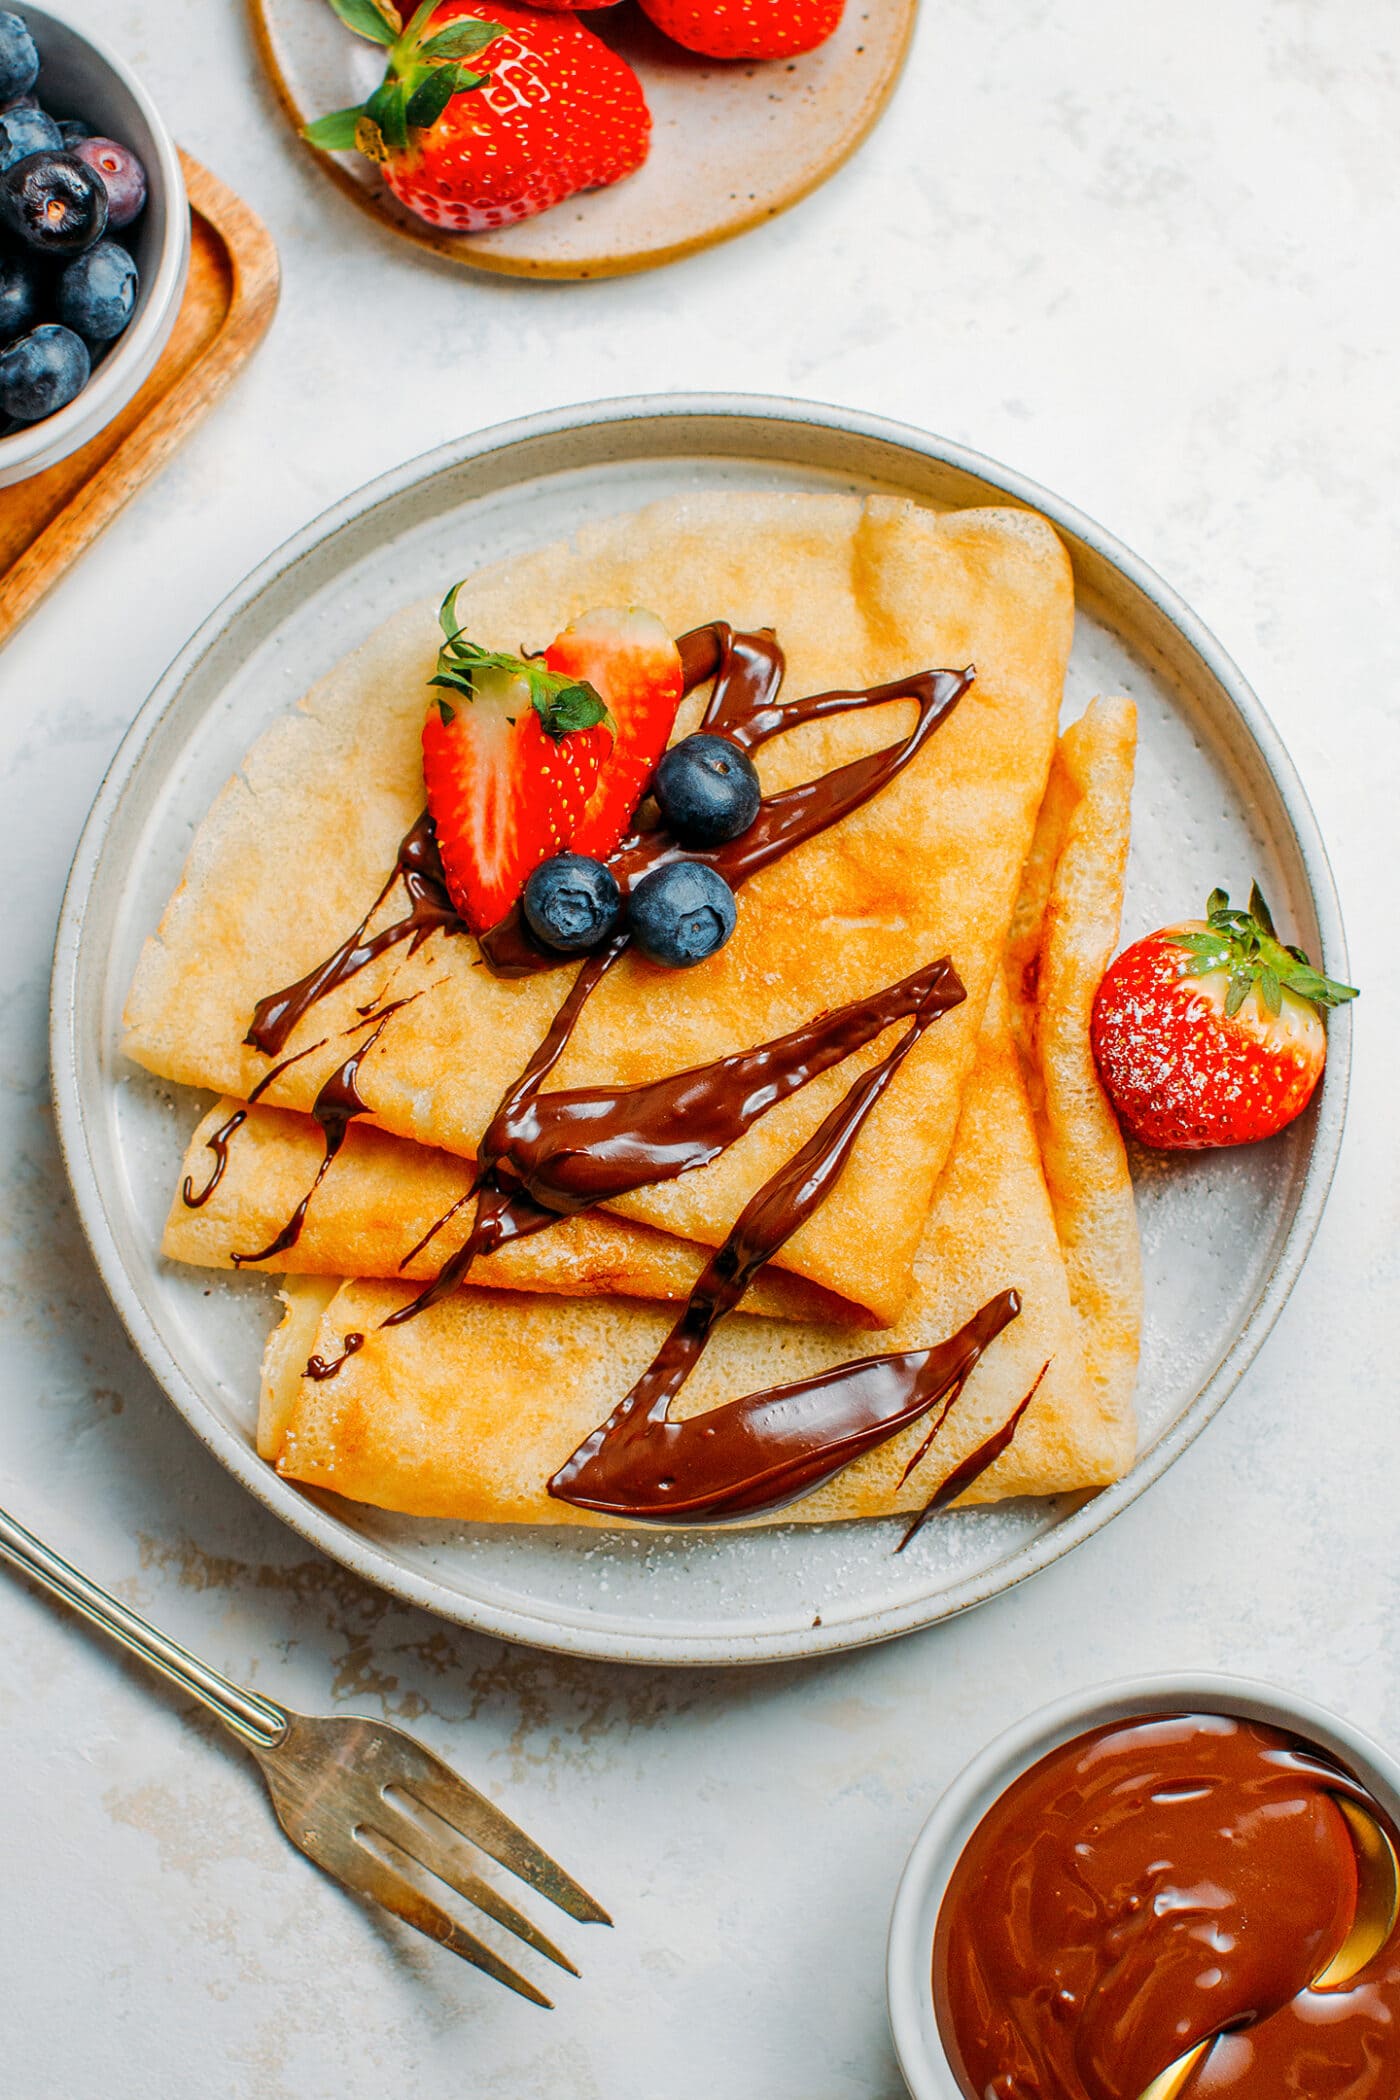 Vegan crêpes topped with chocolate spread and berries.